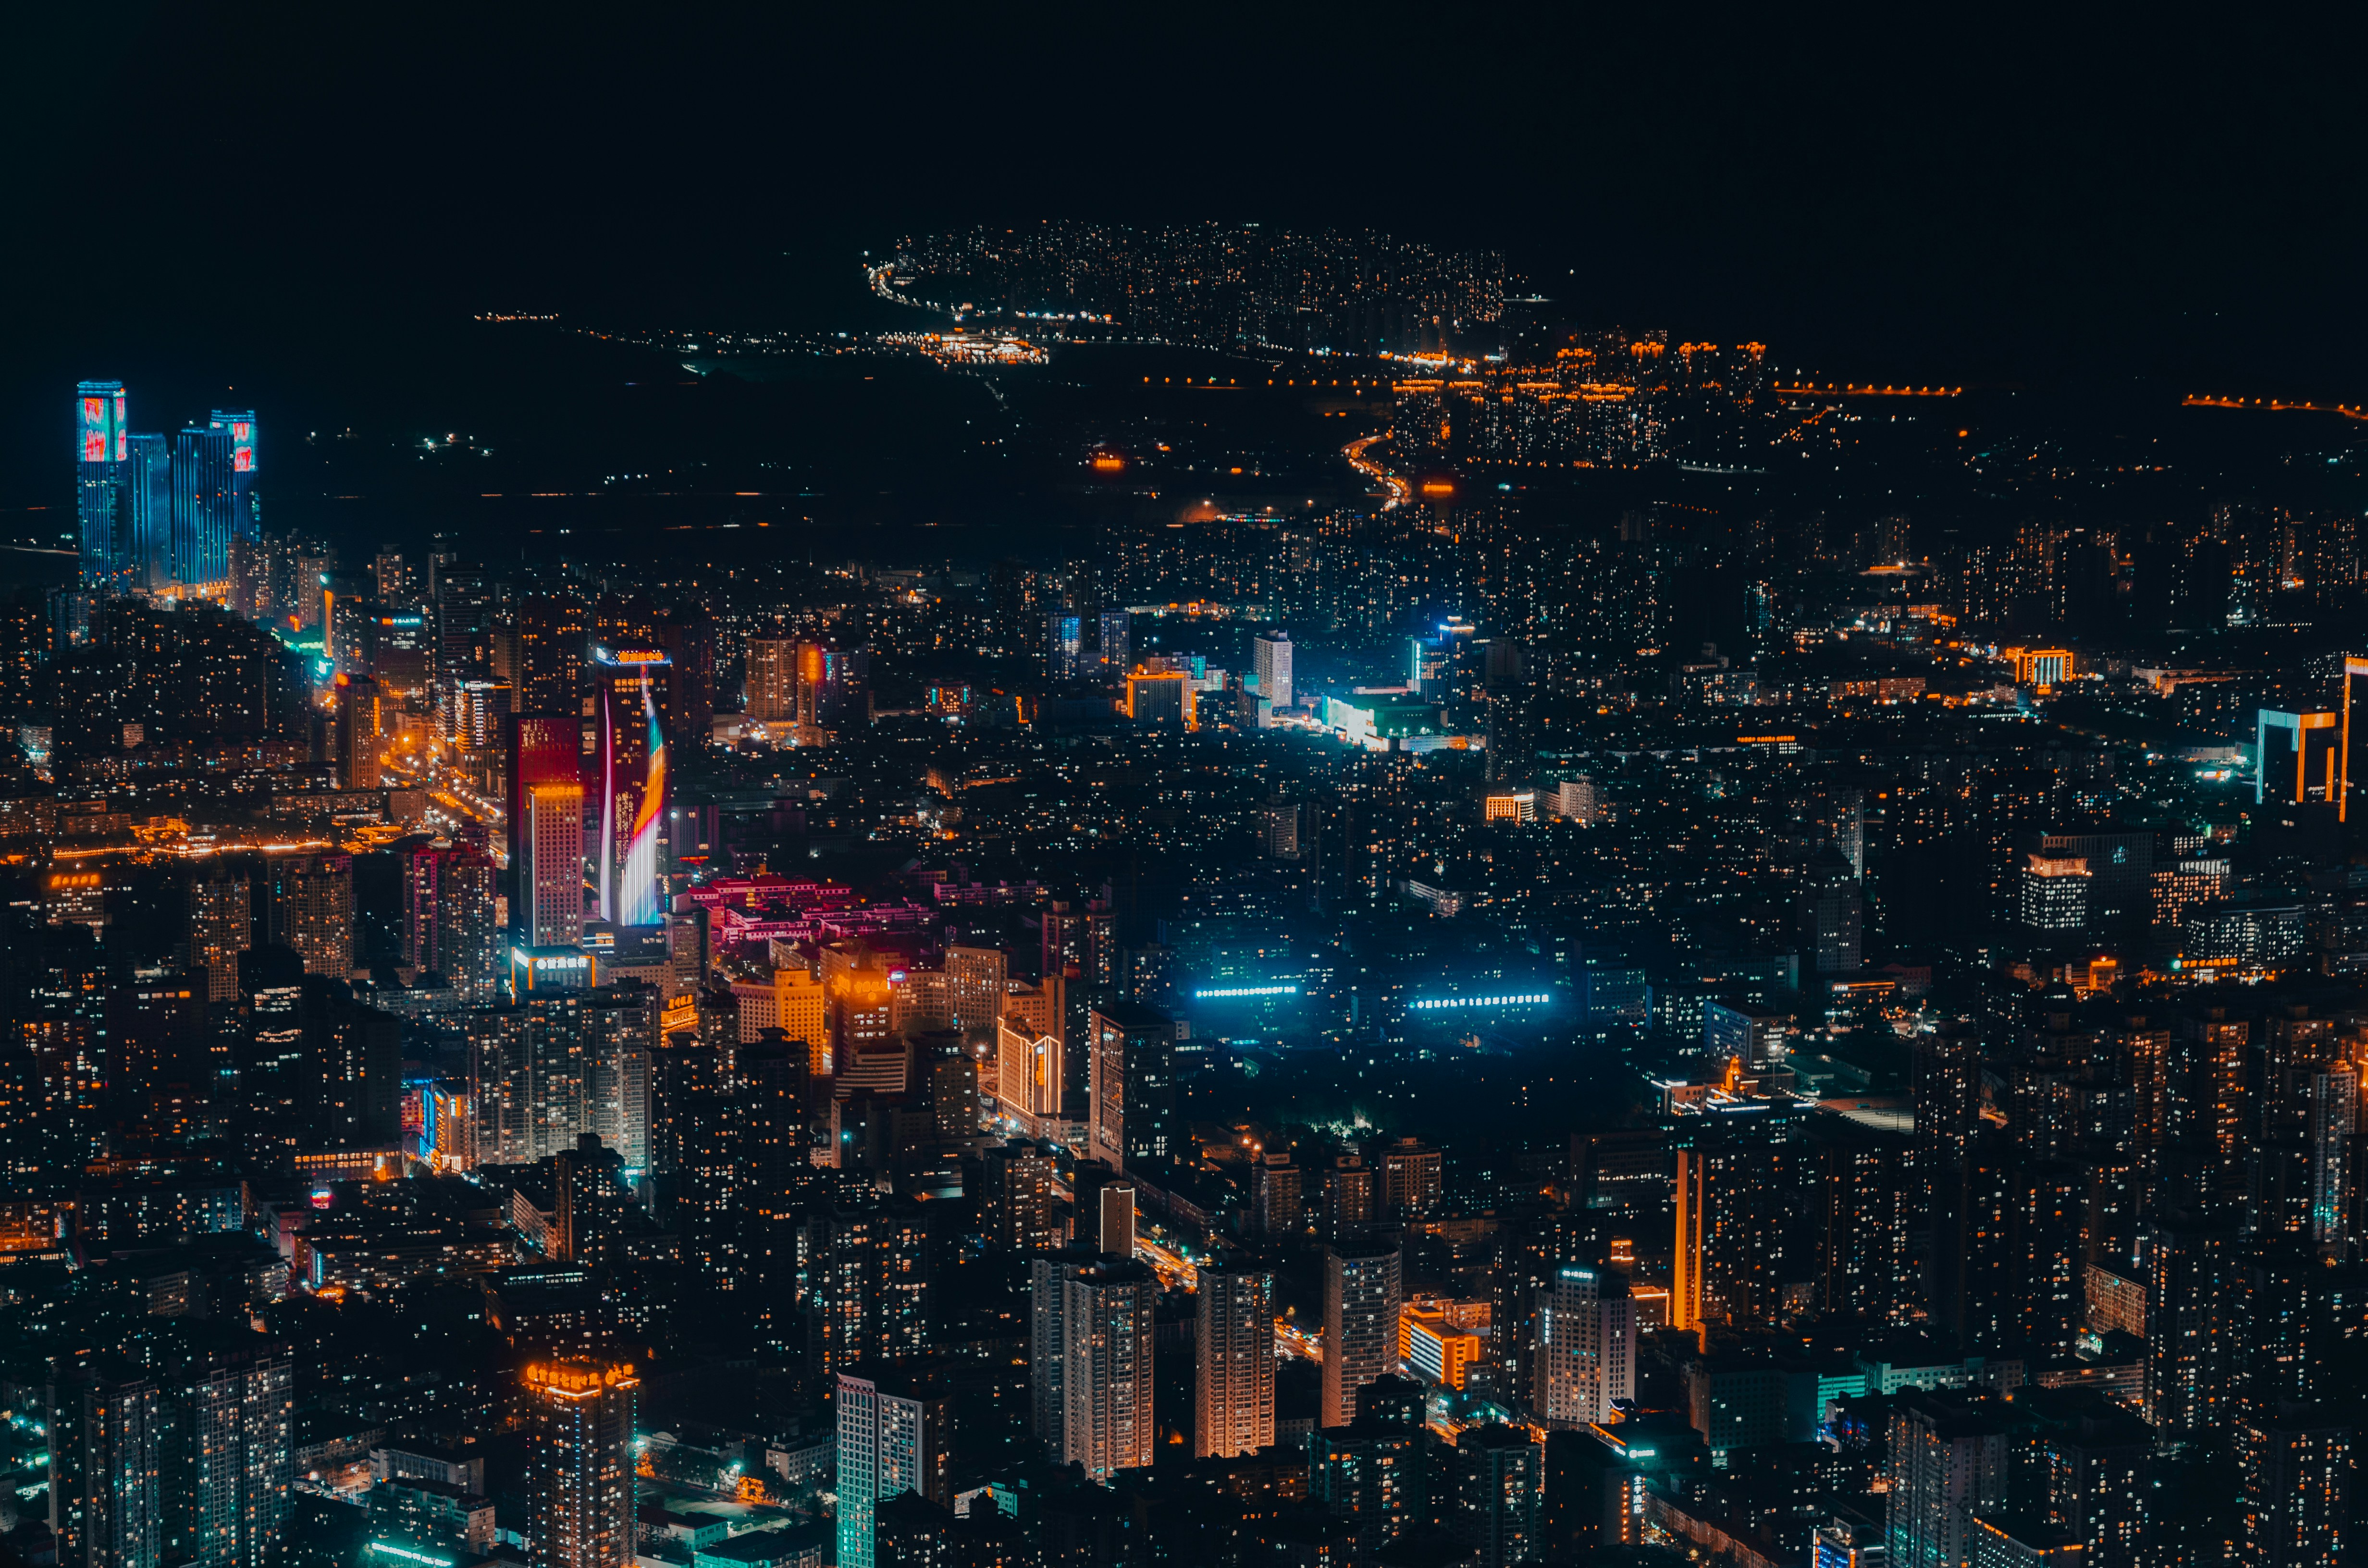 General 4928x3264 landscape city lights building night urban far view skyscraper cityscape Guangdong Province China Archcookie